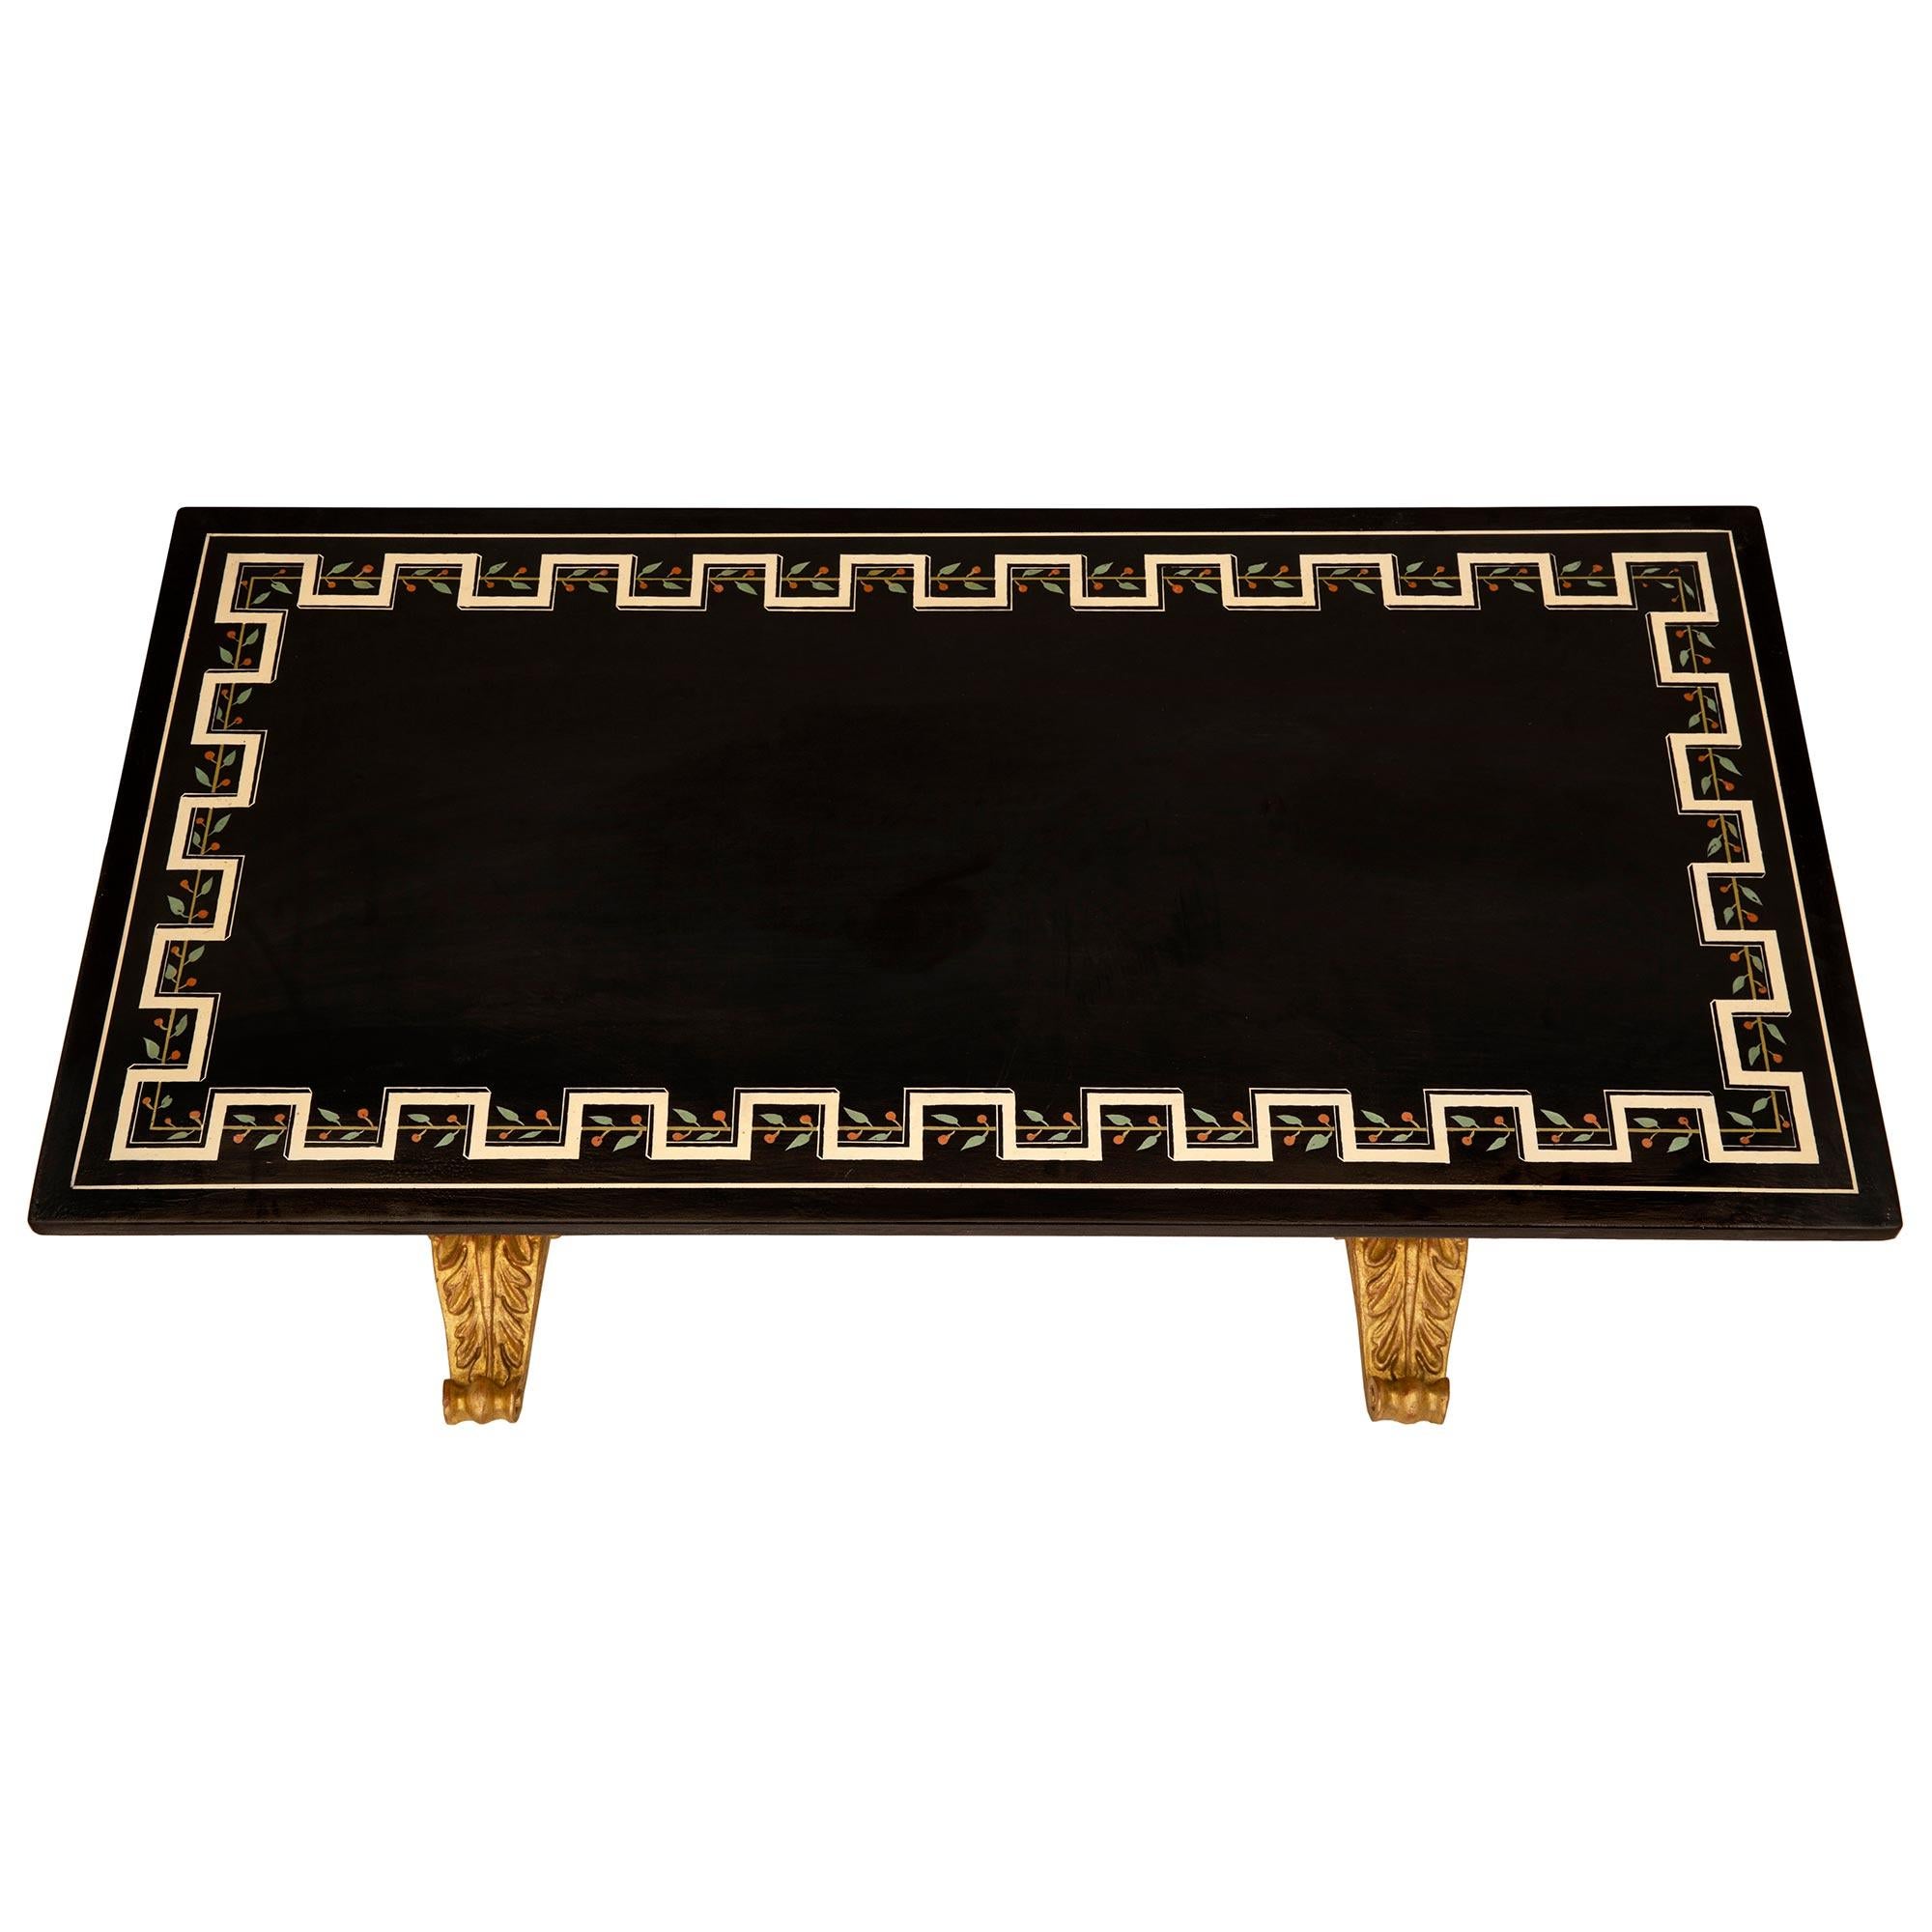 A striking Italian 19th century Baroque st. giltwood and patinated wood coffee/cocktail table. The rectangular table is raised by a beautiful giltwood base with lovely most elegant scrolled acanthus leaf feet below a fine fluted block reserve with a